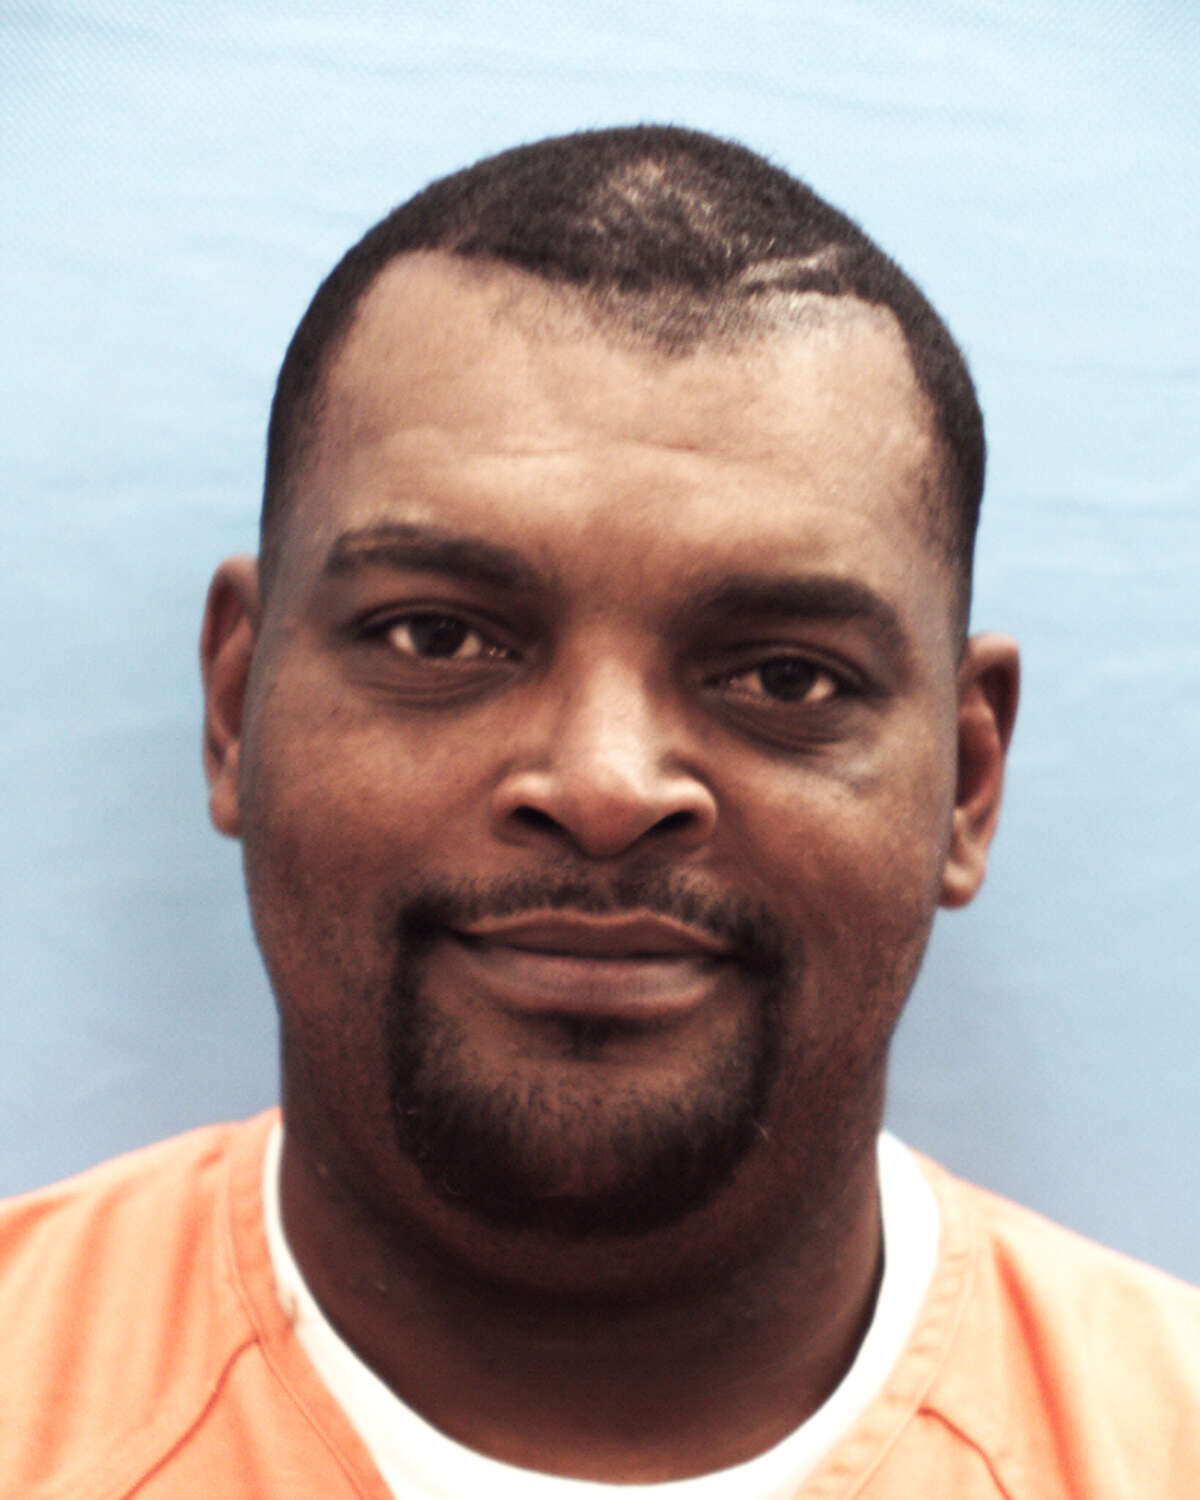 Rodney Lee Carter, 40, of Seguin, was arrested in January and indicted June 5, according to the Guadalupe County district attorney's office. Carter is accused of having a sex with a female family member last year in Seguin and other locations in Guadalupe County, said Det. Franklin Thomas of the Seguin Police Department.